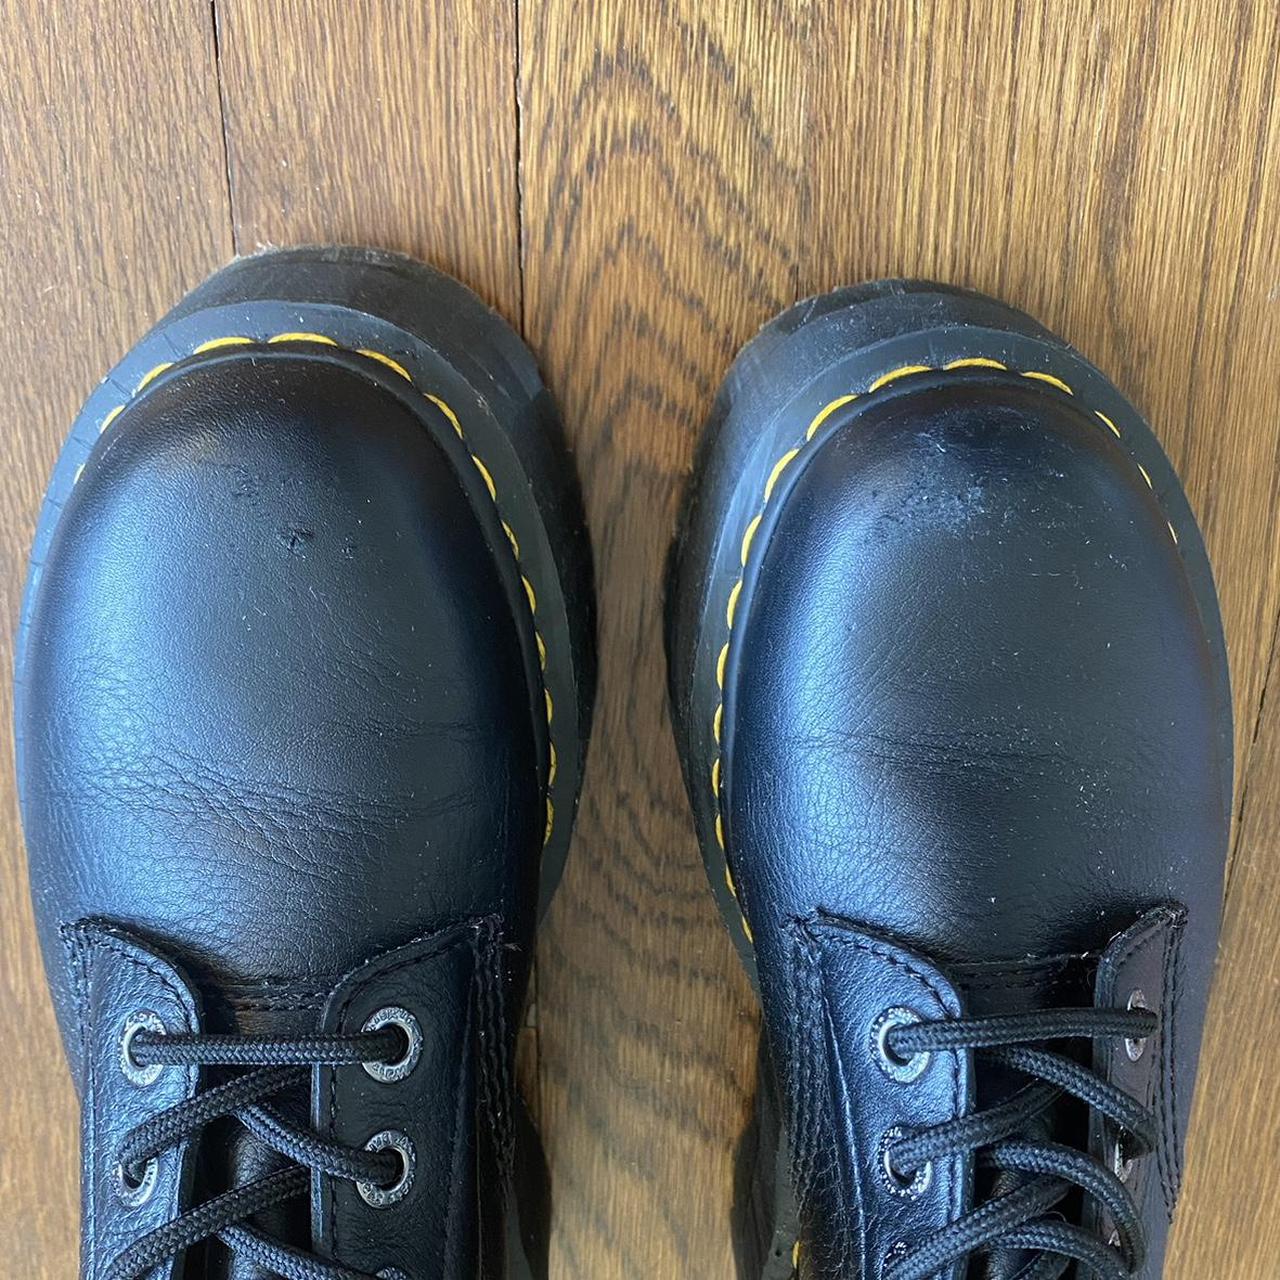 Dr. Martens Women's Black and Yellow Boots (2)